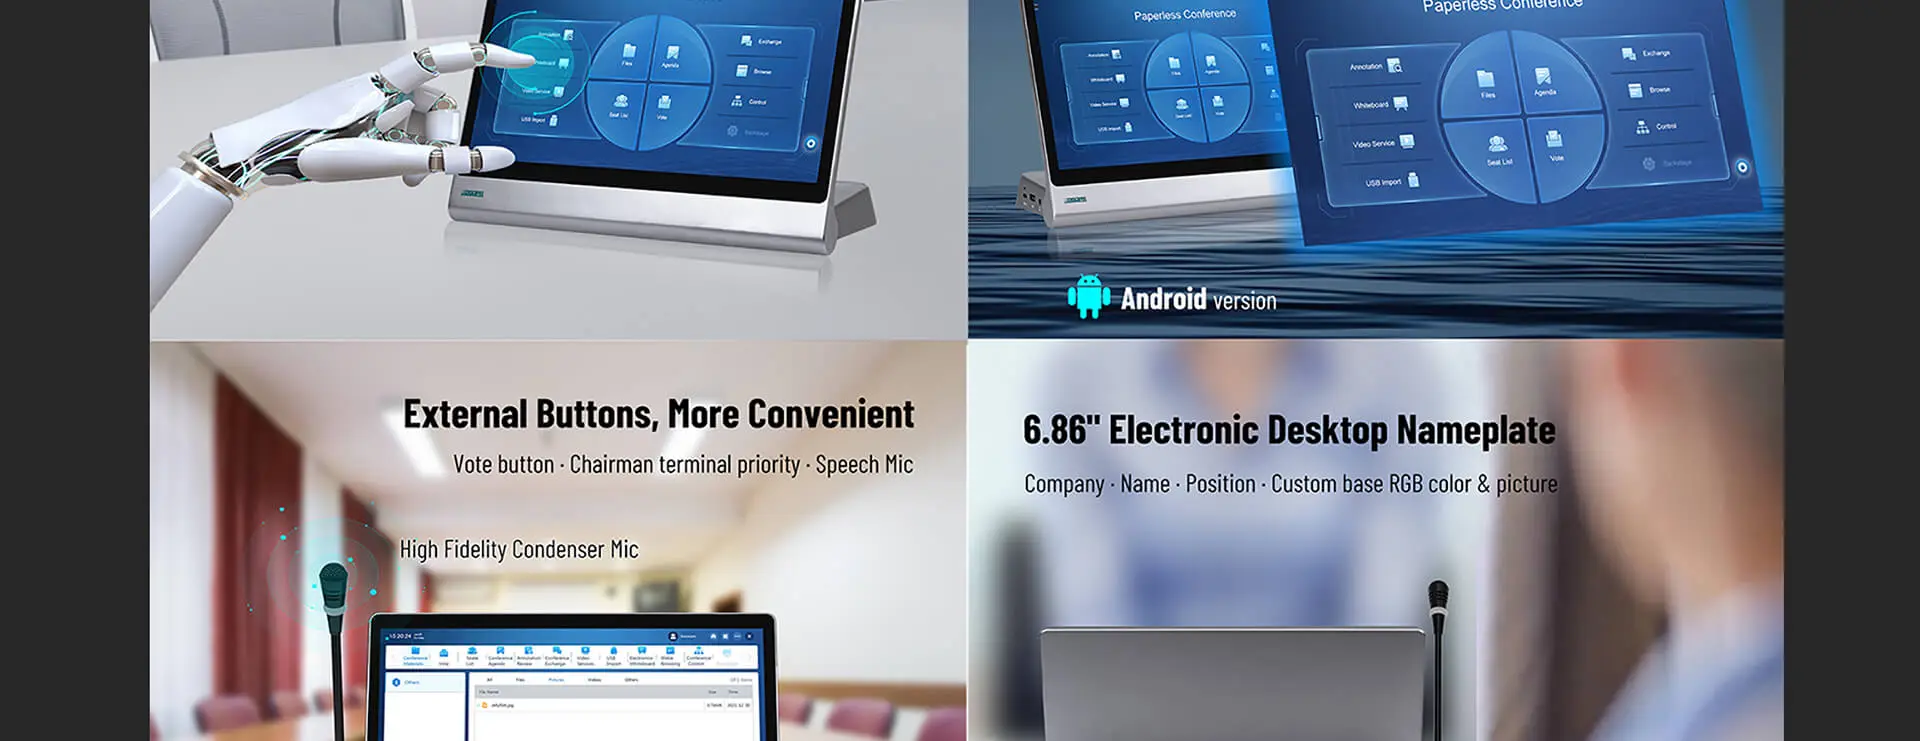 Desktop All-in-one Speaking and Voting Terminal